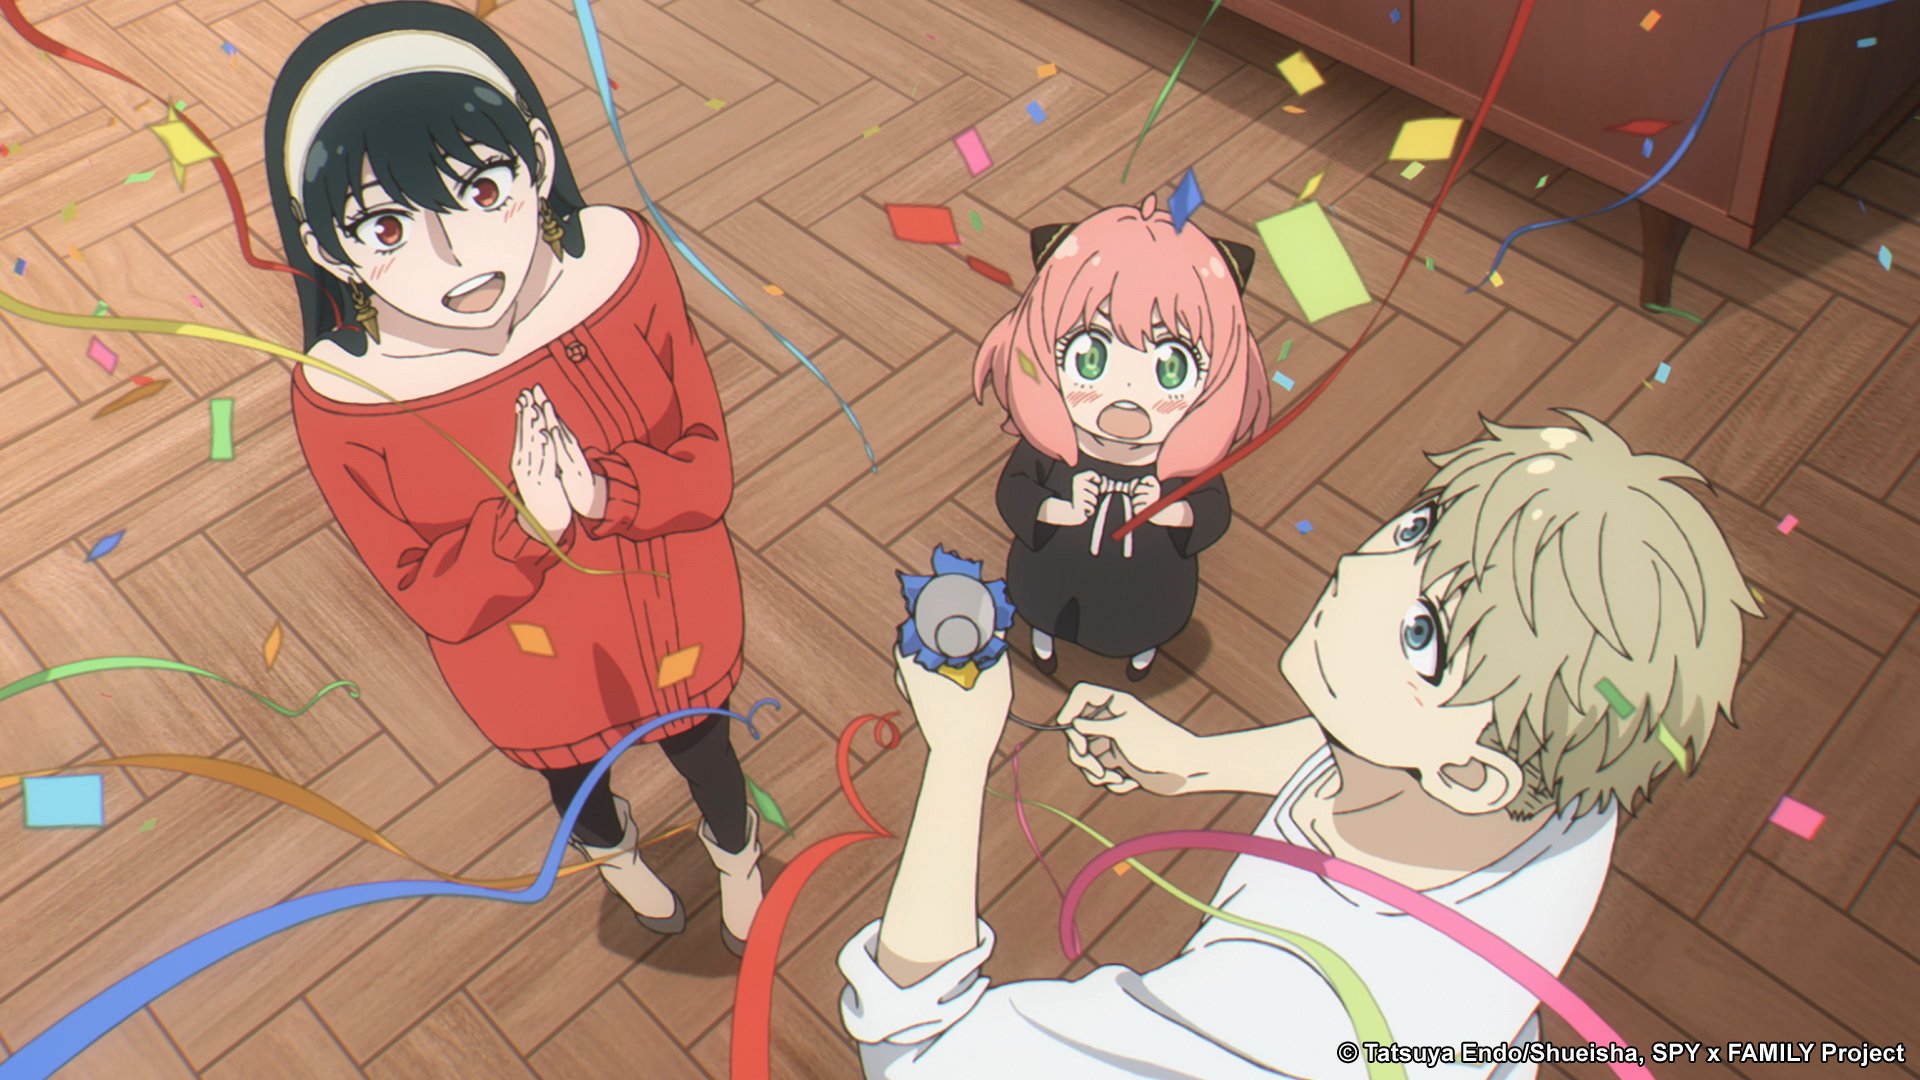 Yor, Anya, and Loid Forger celebrating in 'Spy x Family' Episode 5. They're releasing streamers and smiling.